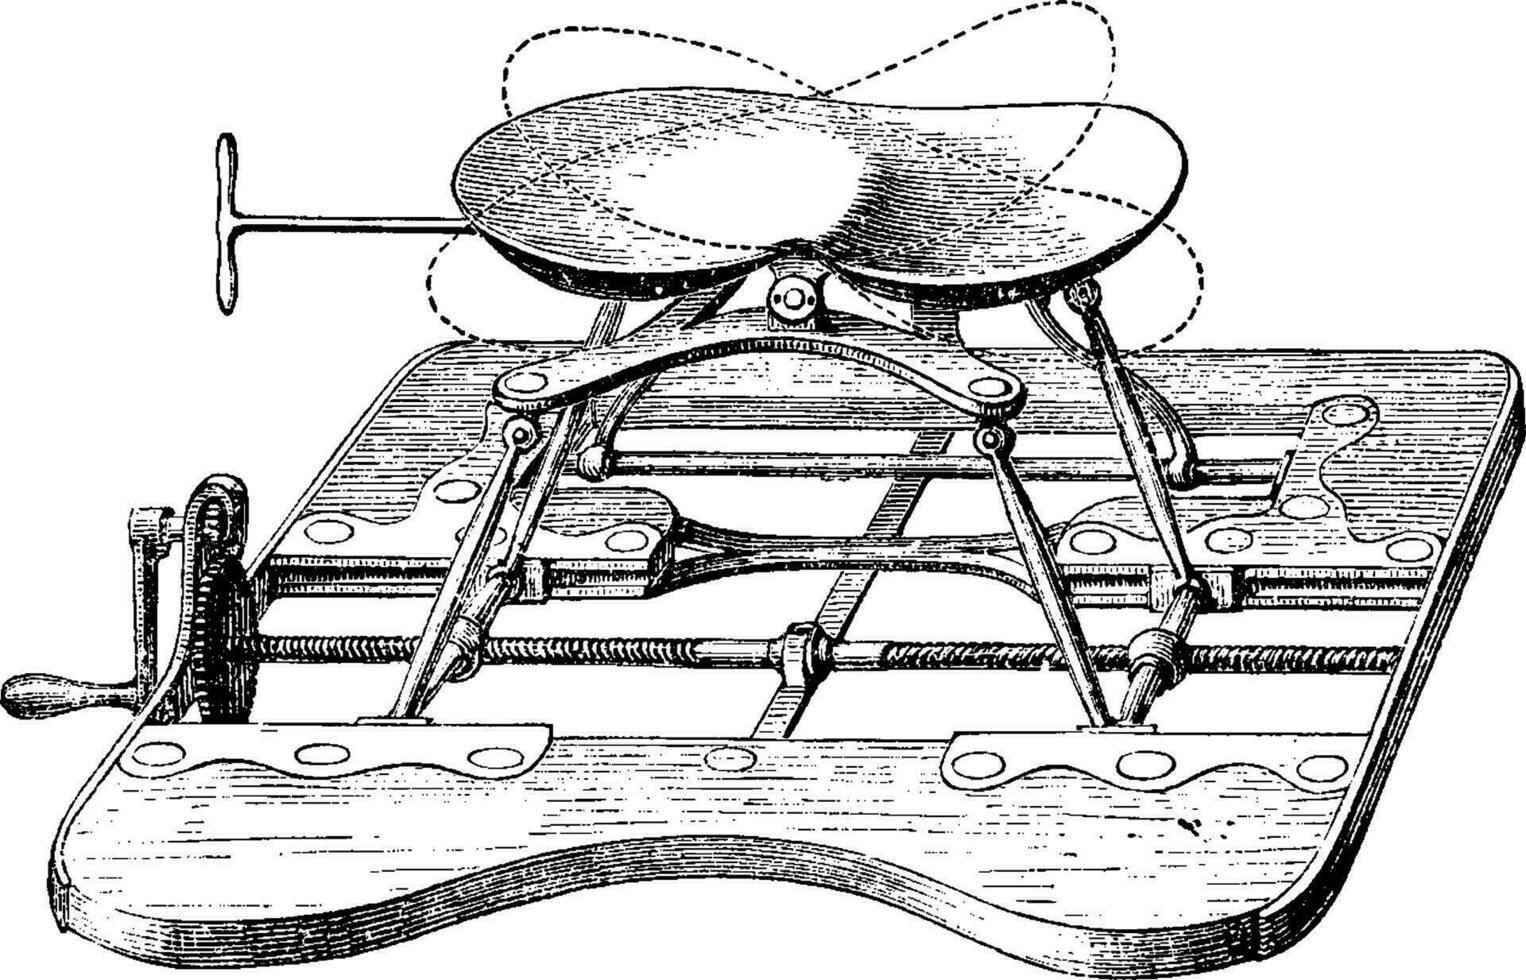 Apparatus for lithotripsy, the seat being high, vintage engravin vector